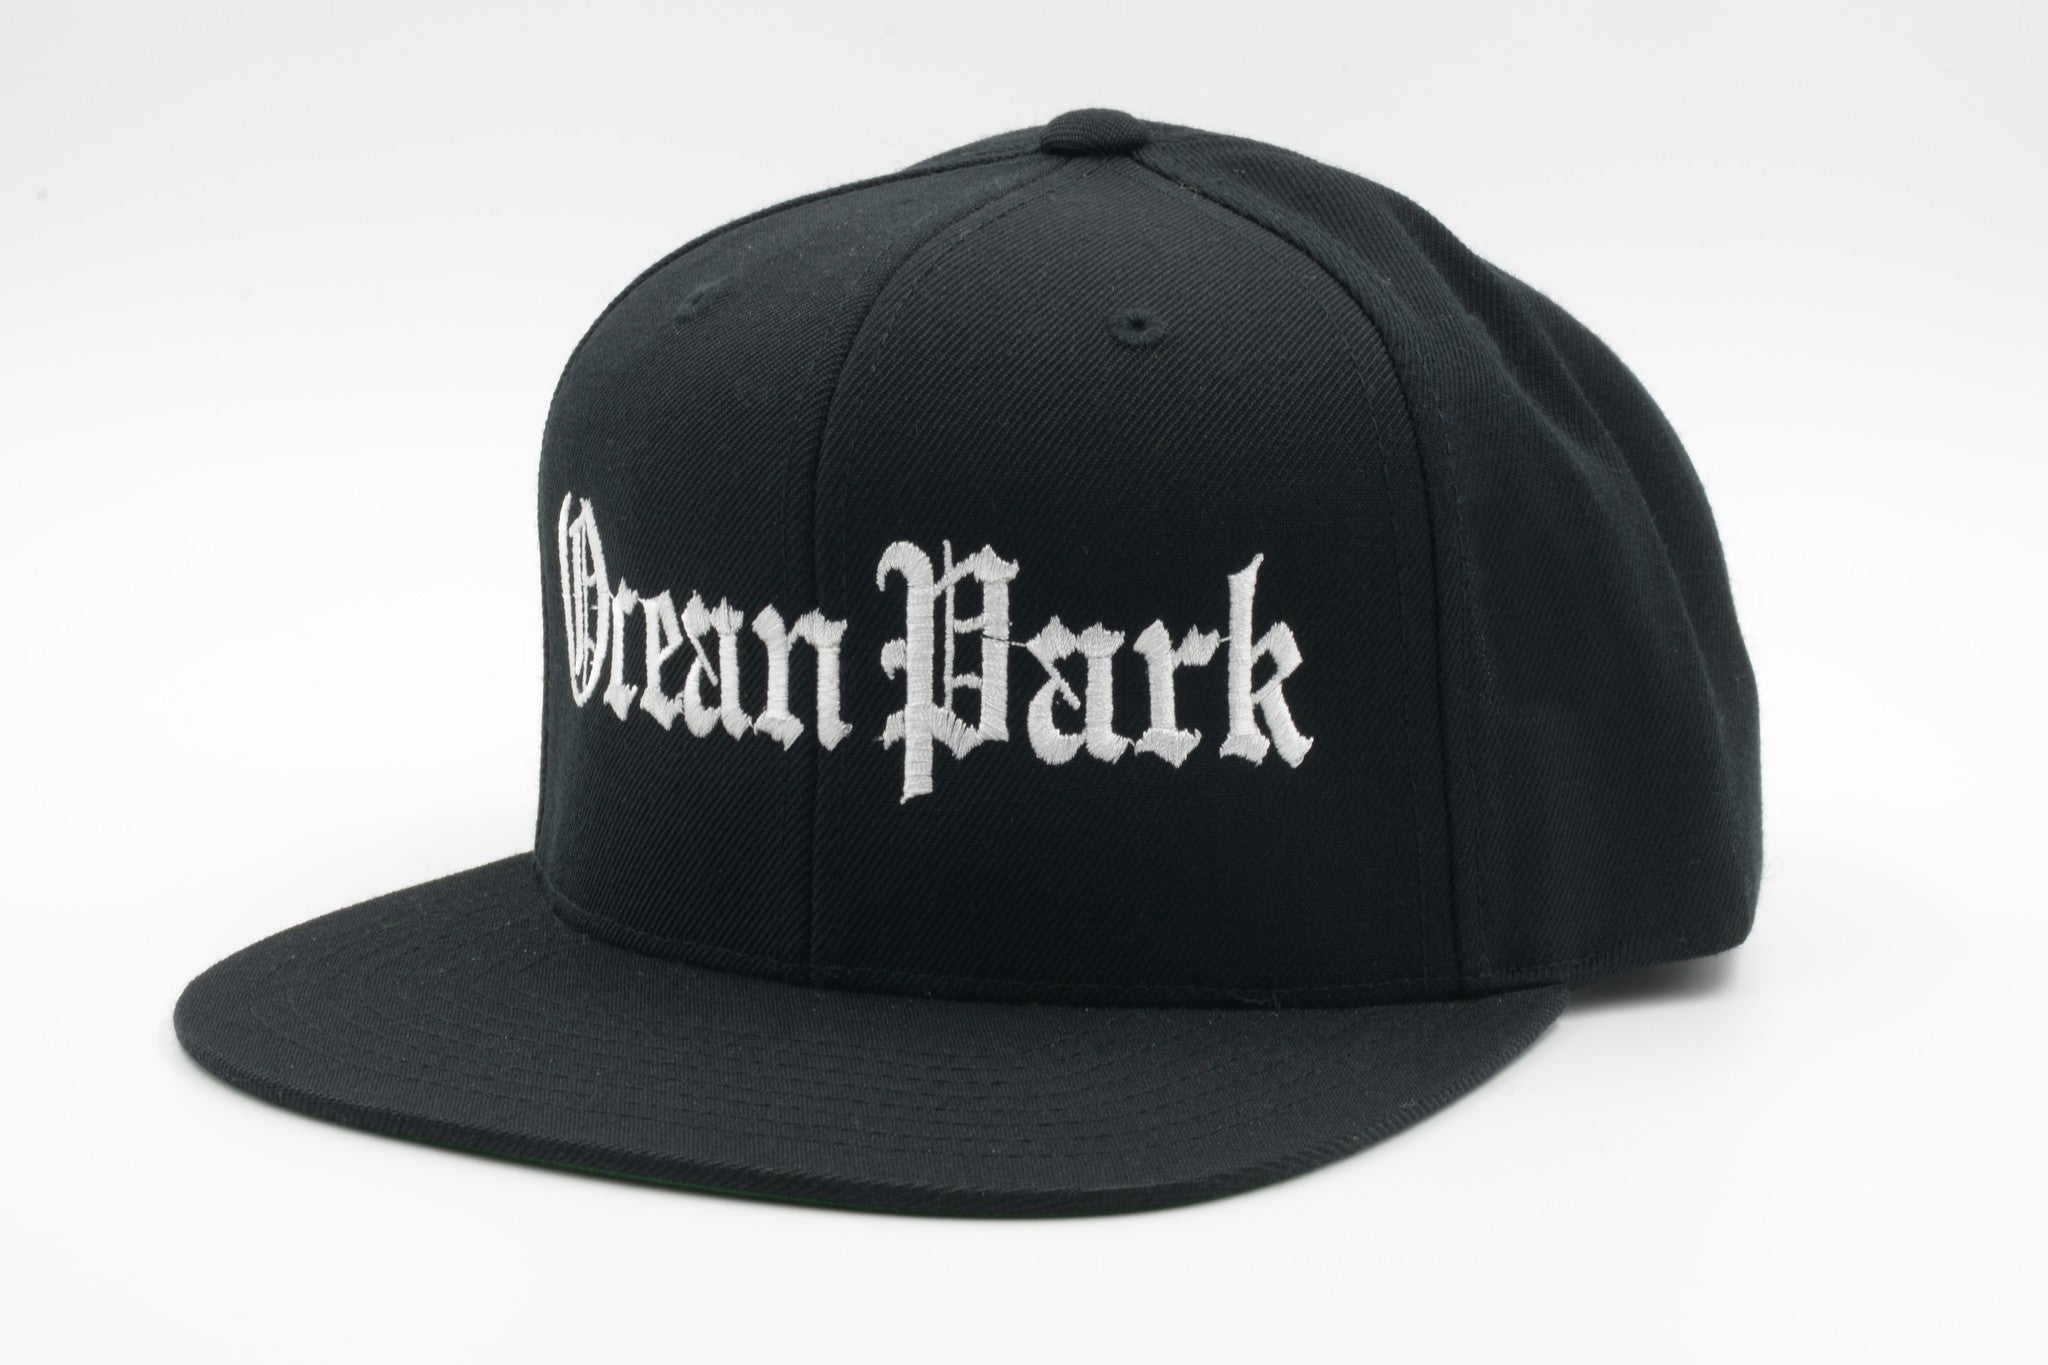 OCEAN PARK OLD ENGLISH STYLE  HAT